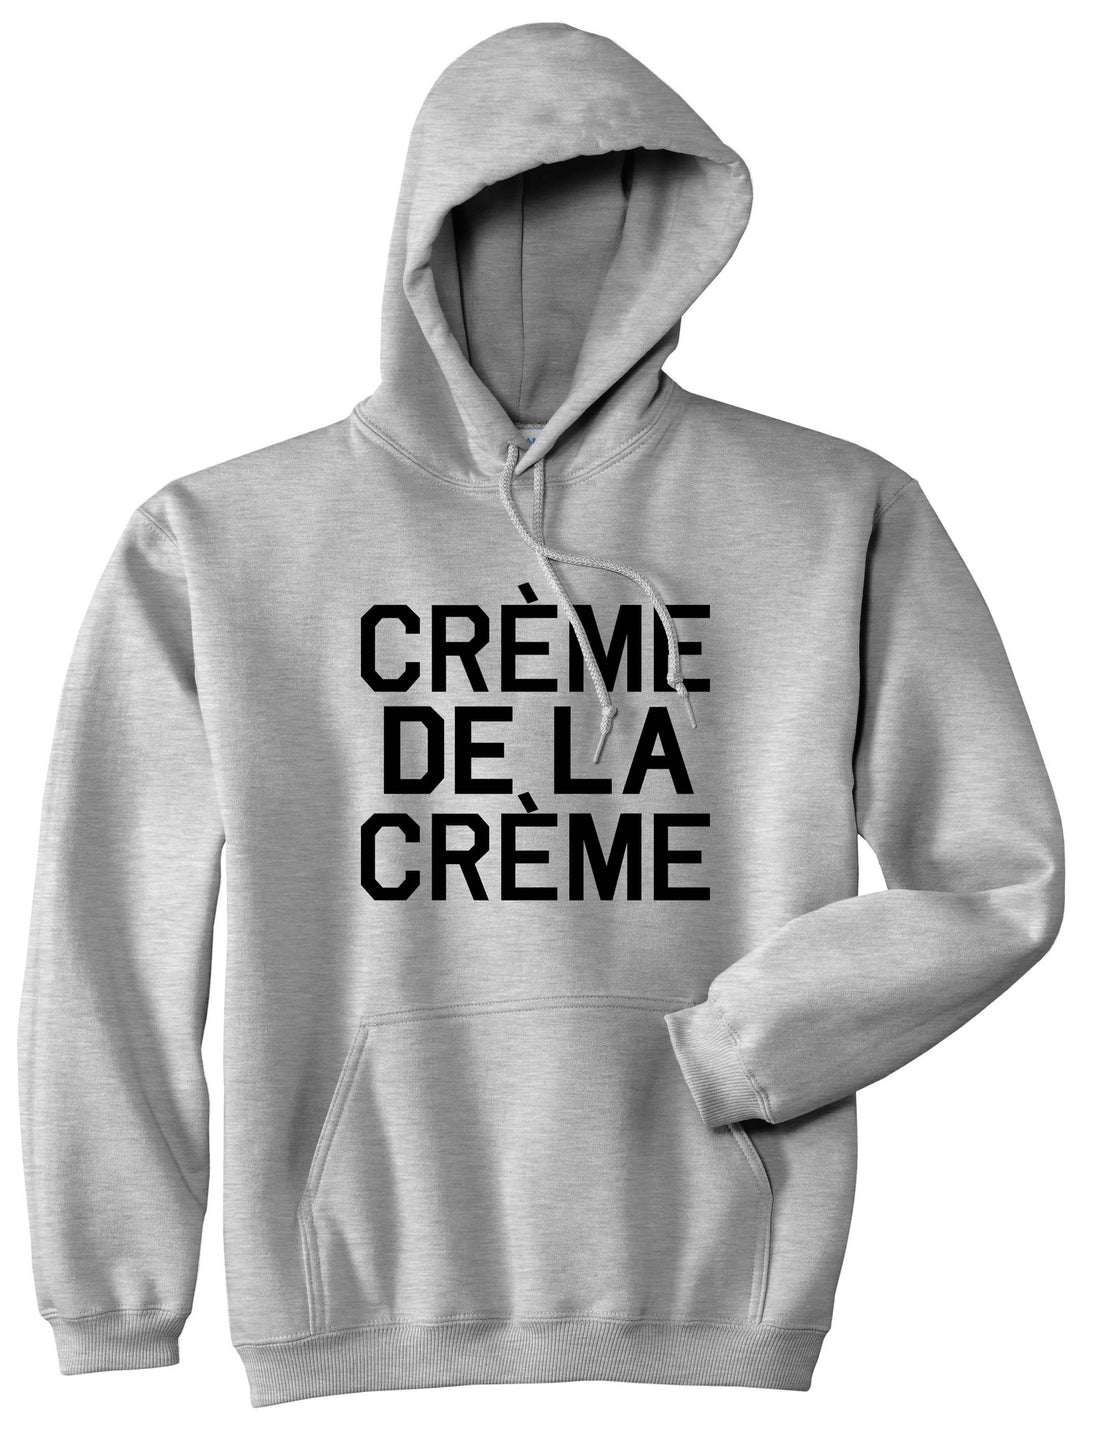 Creme De La Creme Celebrity Fashion Crop Pullover Hoodie Hoody In Grey by Kings Of NY